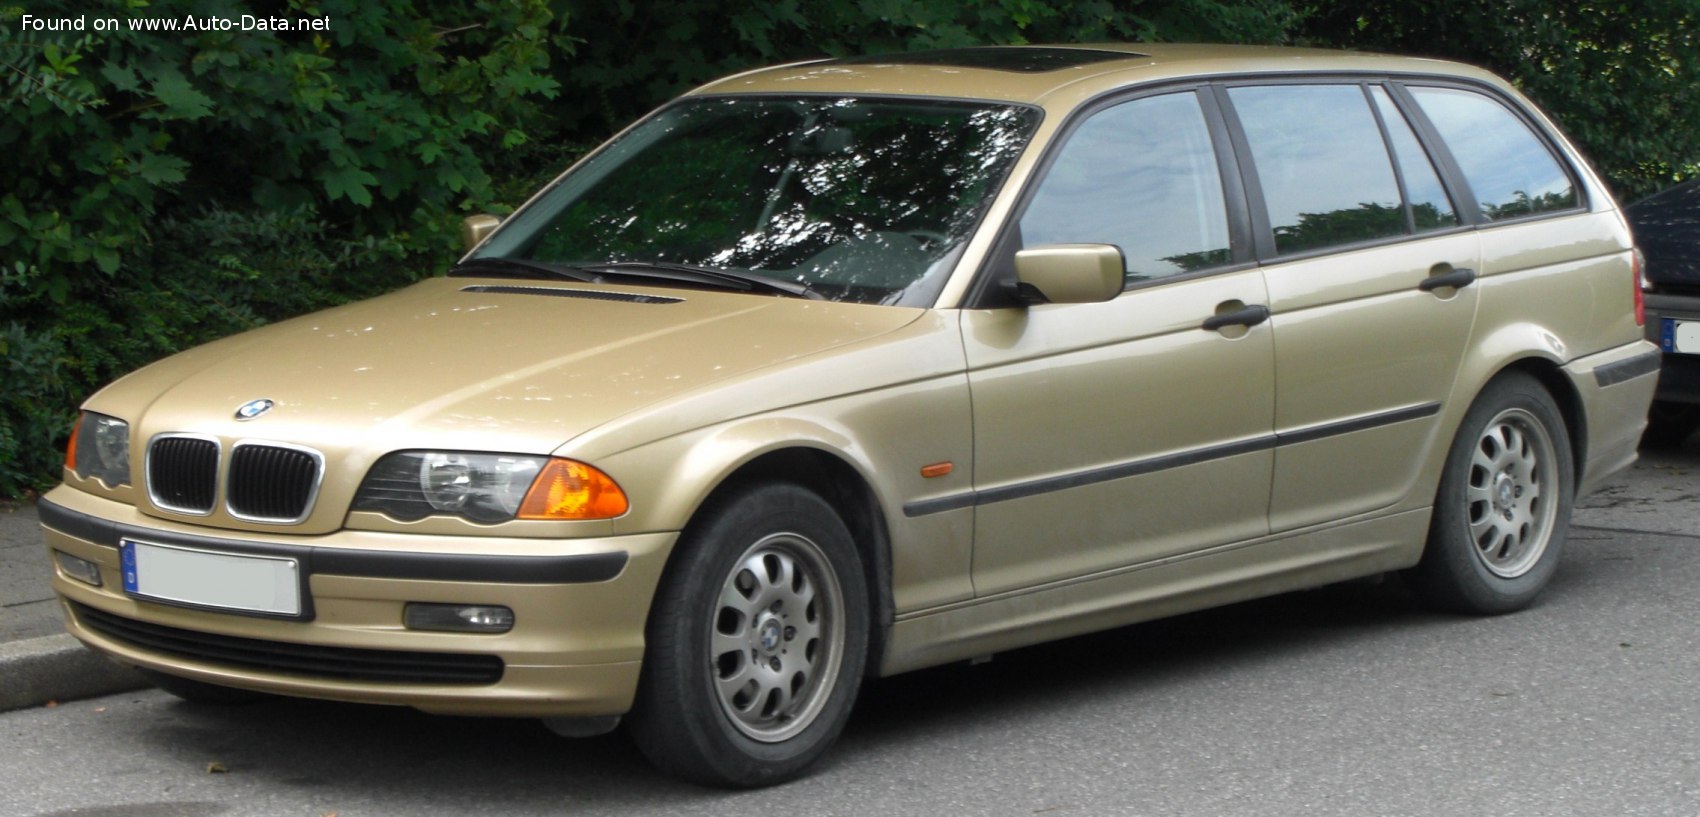 2000 BMW Series Touring 330i (231 | Technical data, fuel consumption, Dimensions